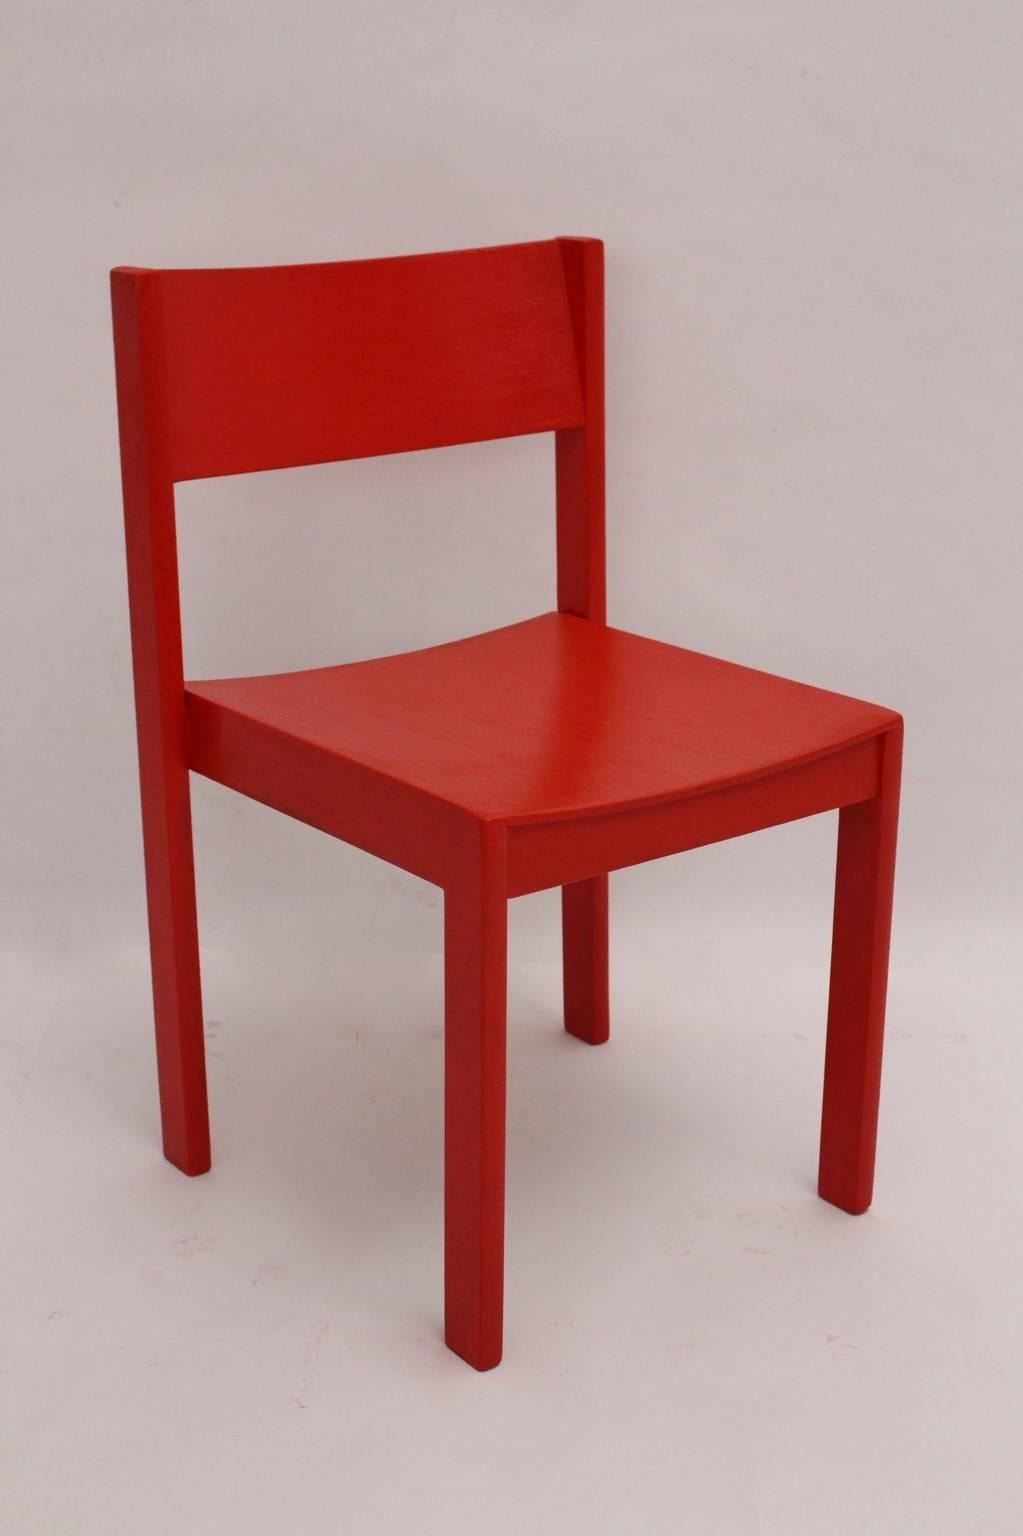 Beech Mid-Century Modern Red Carl Auböck Dining Room Chairs, 1956, Vienna Set of Six